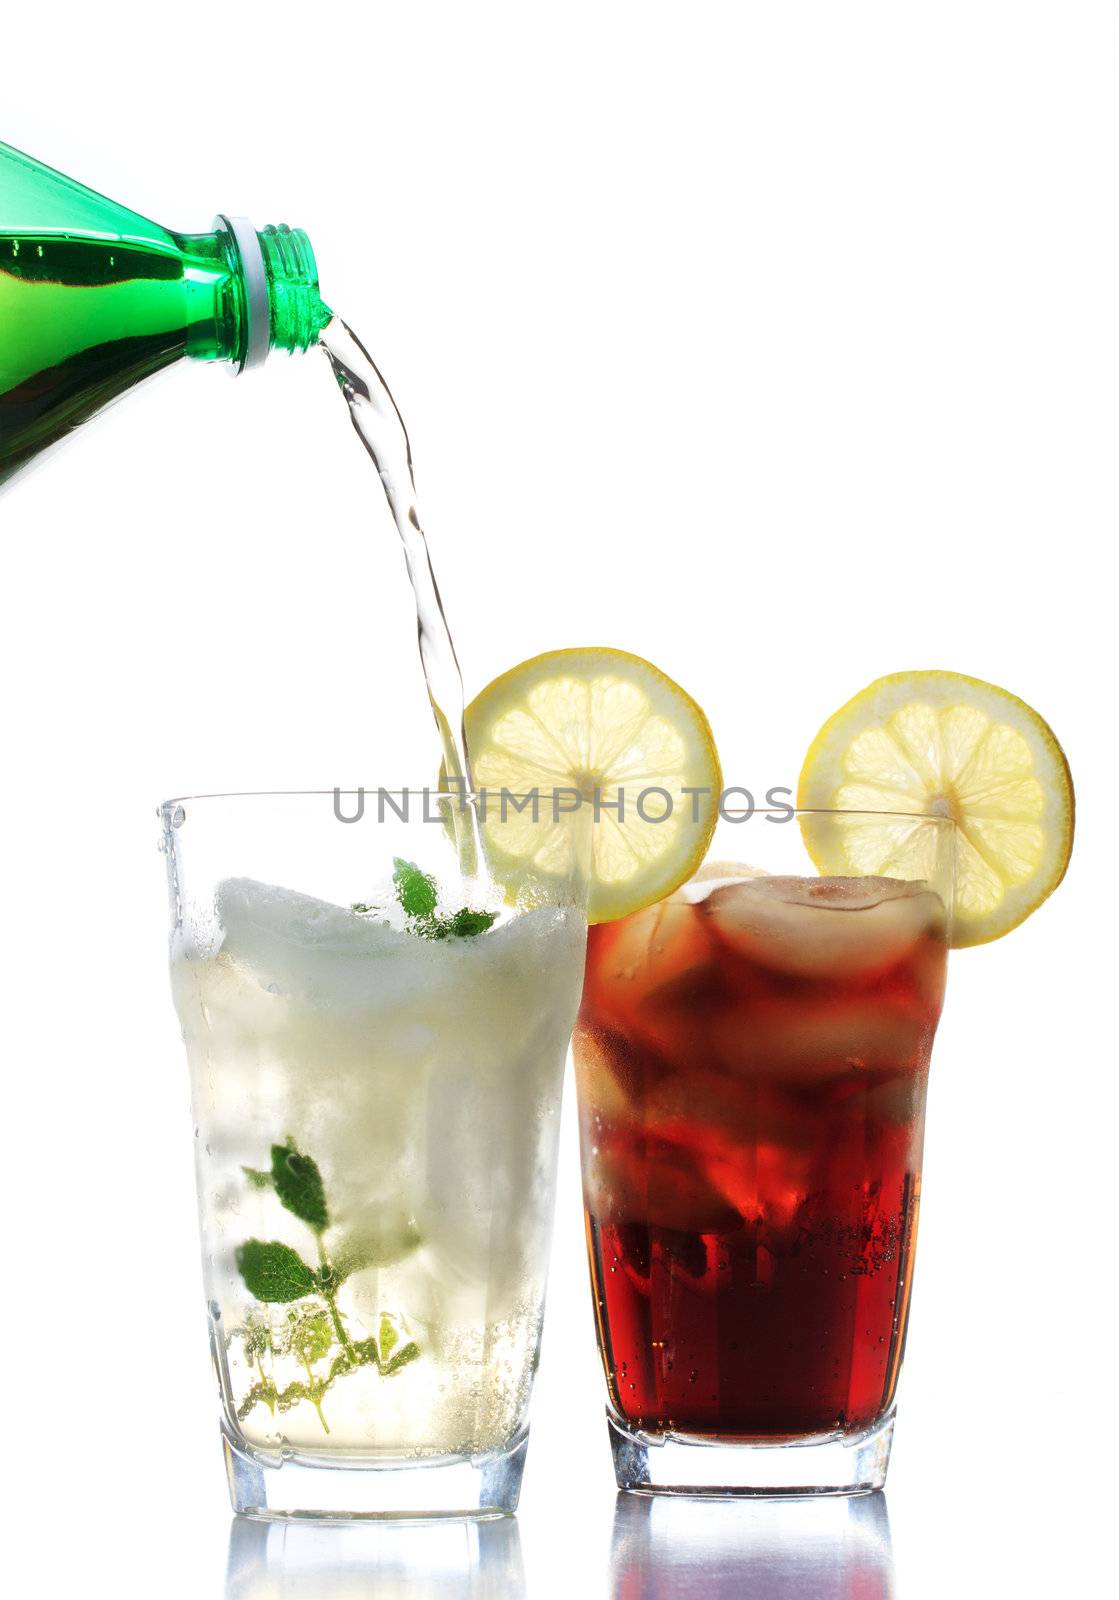 Ginger ale and cola in the glasses with lemon garnish